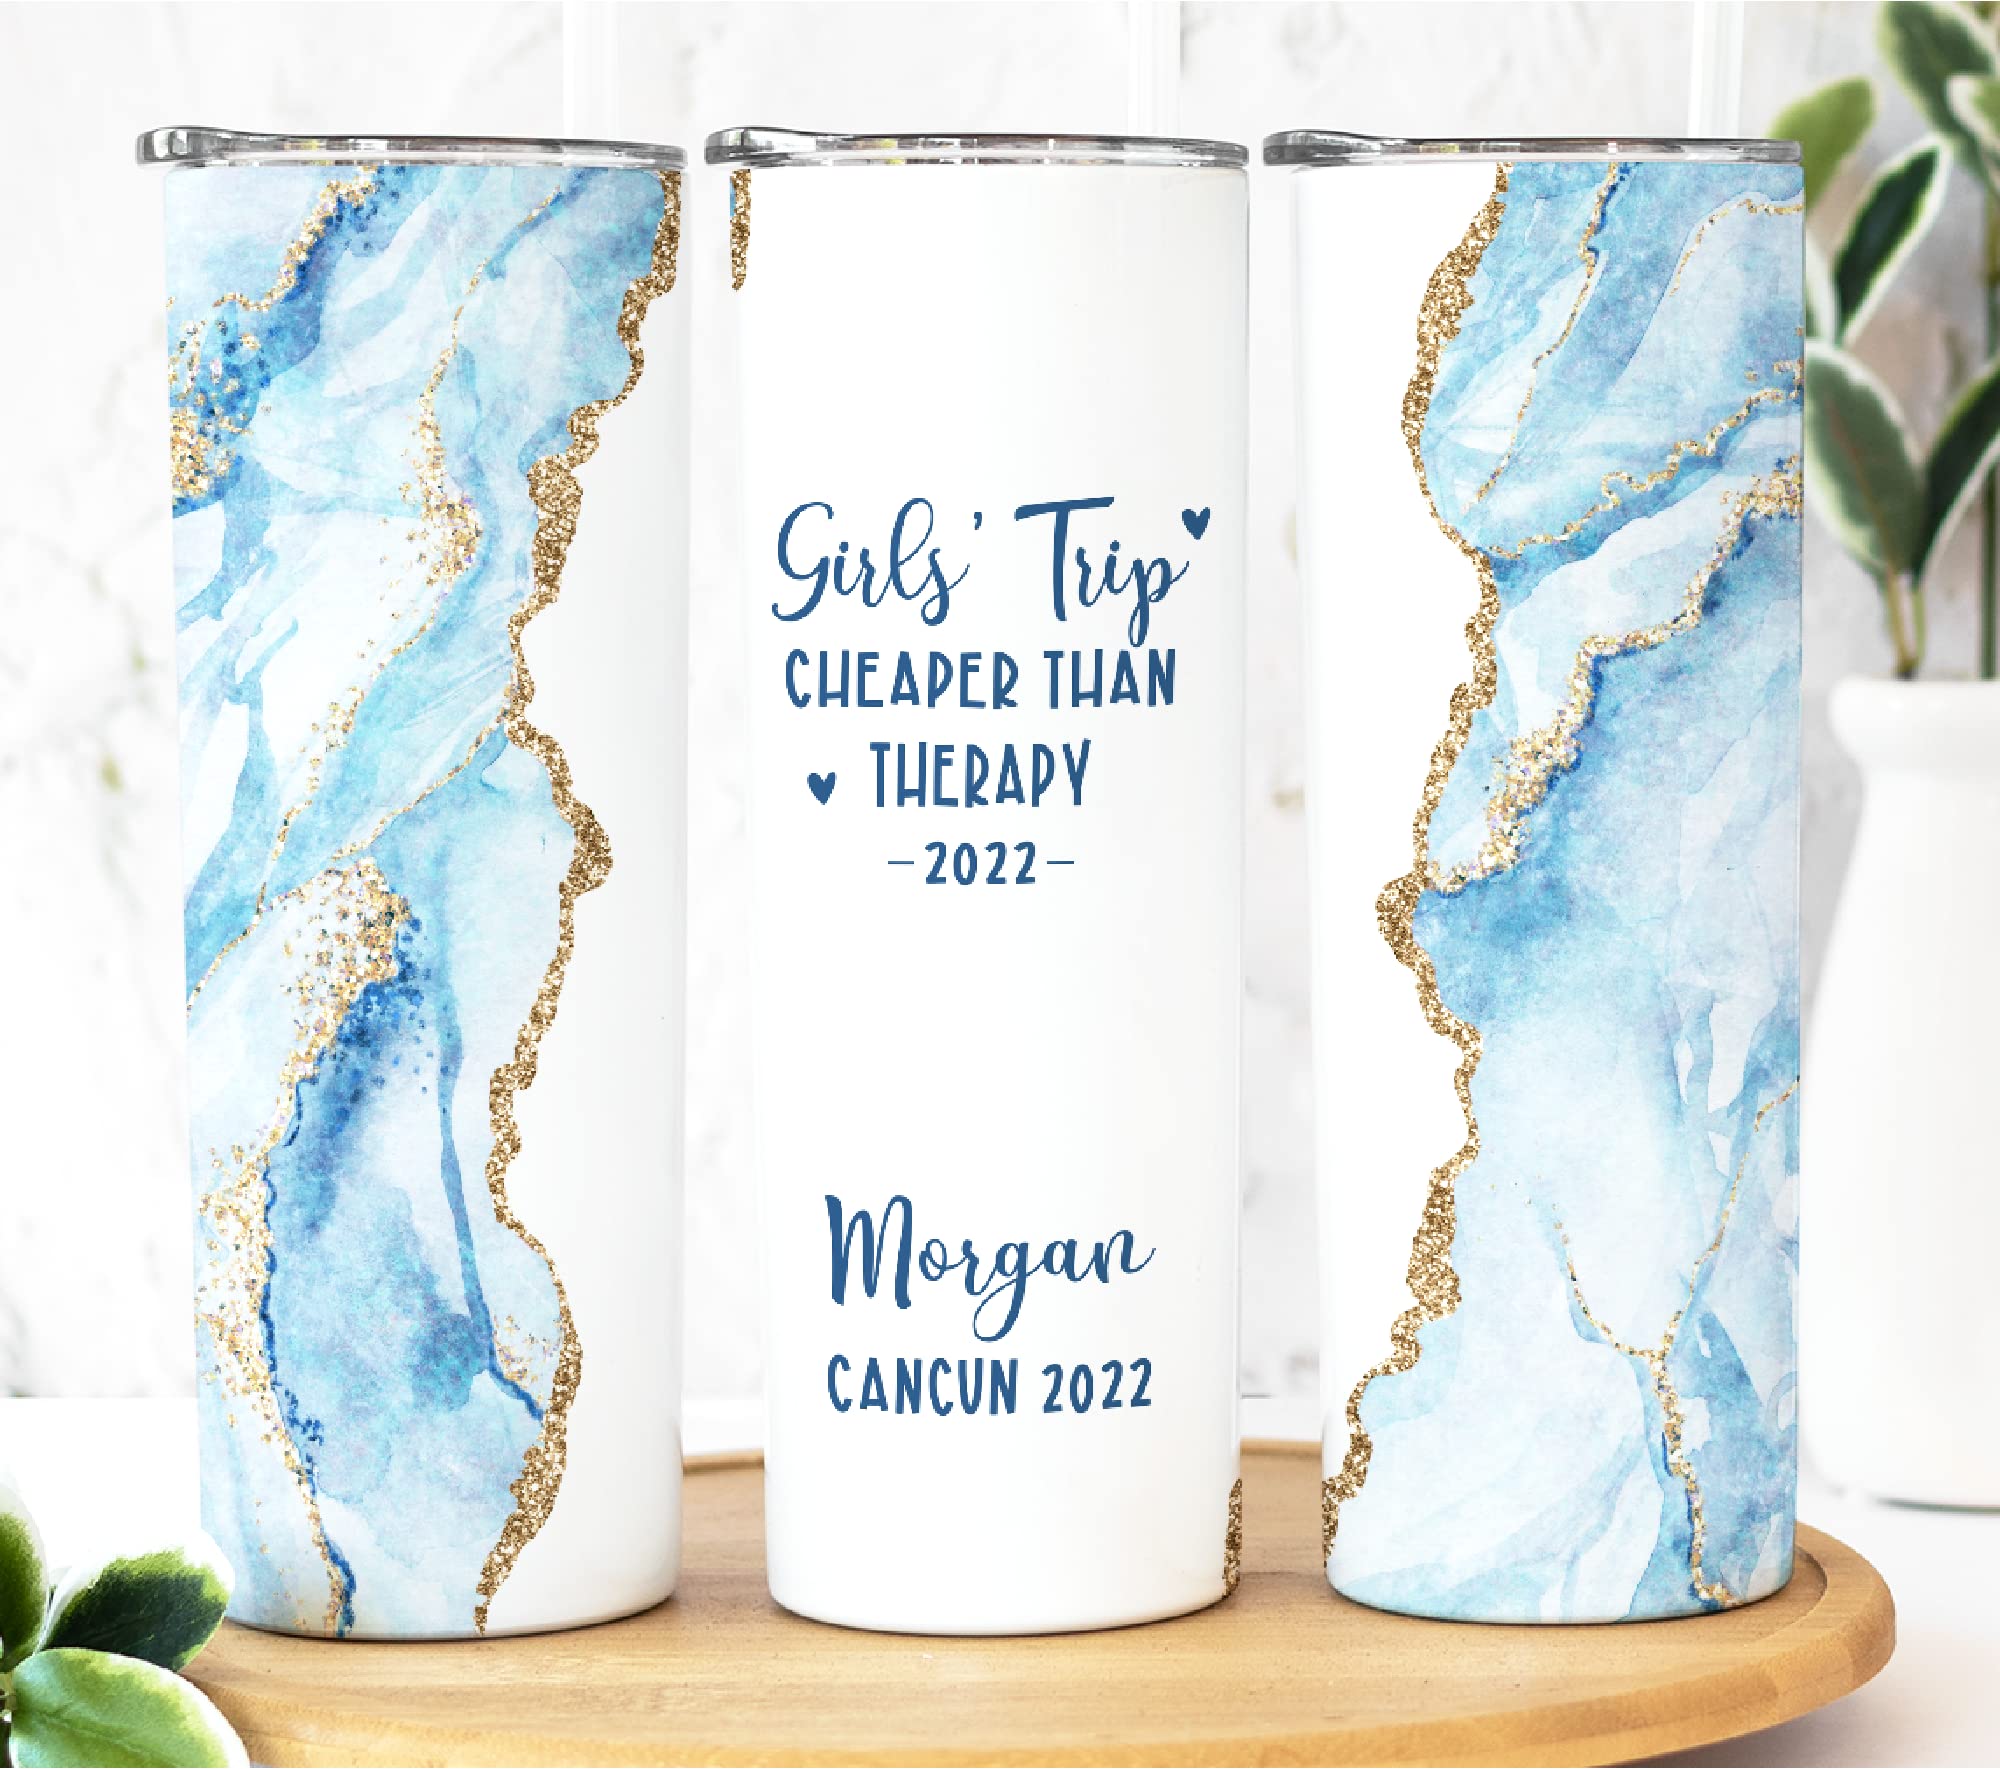 AVITO Personalized Girls Trip Tumbler, 20 oz, Cheaper Than Therapy, Girls Weekend Gift, Girls Trip Tumbler, Girls Getaway, Girls Vacation, Girls Weekend Cheaper than Therapy